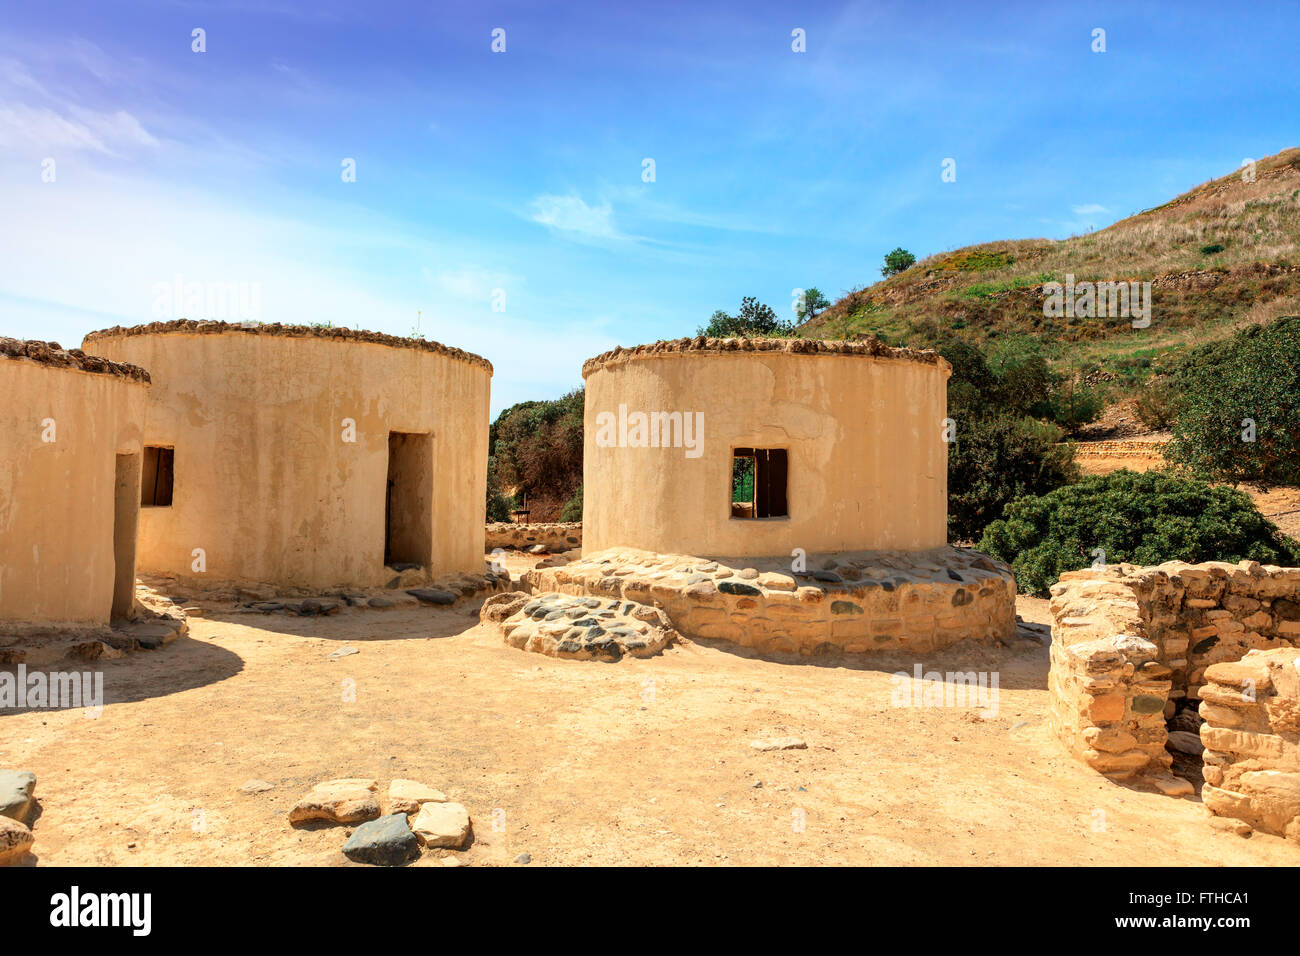 The Neolithic settlement of Choirokoitia is one of the most important prehistoric sites in the eastern Mediterranean. Stock Photo